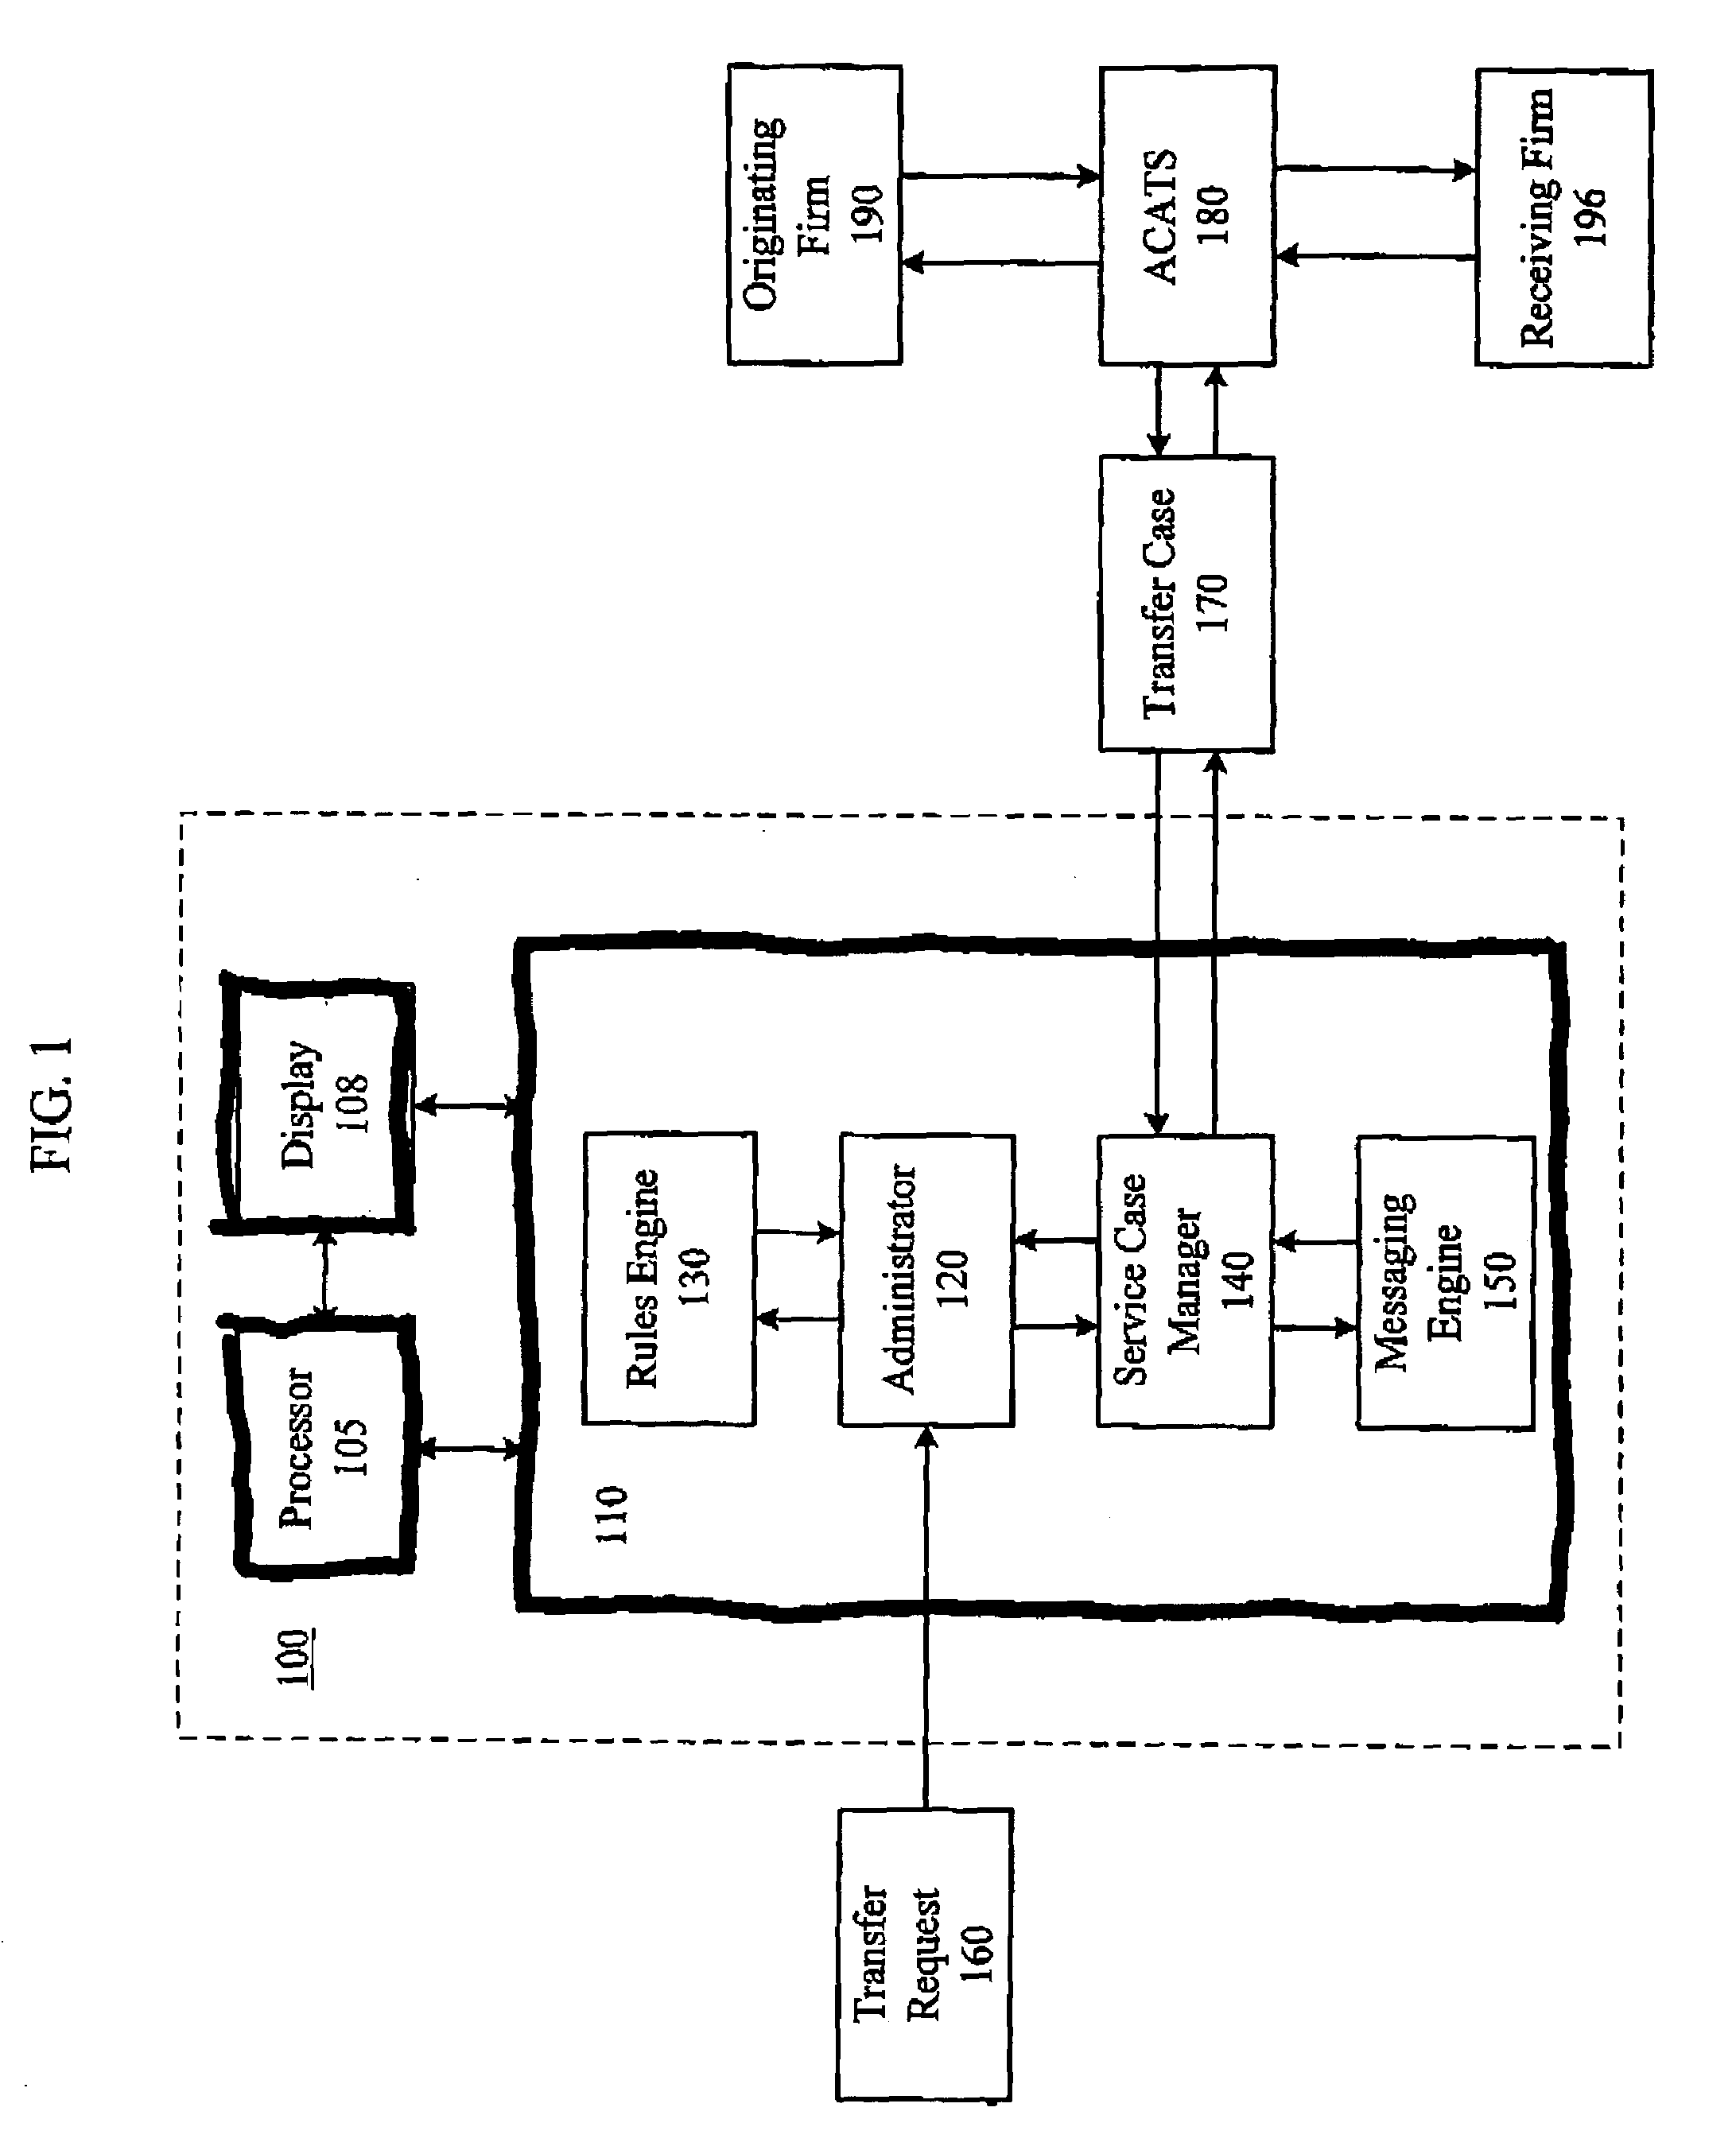 System and method for facilitating investment account transfers